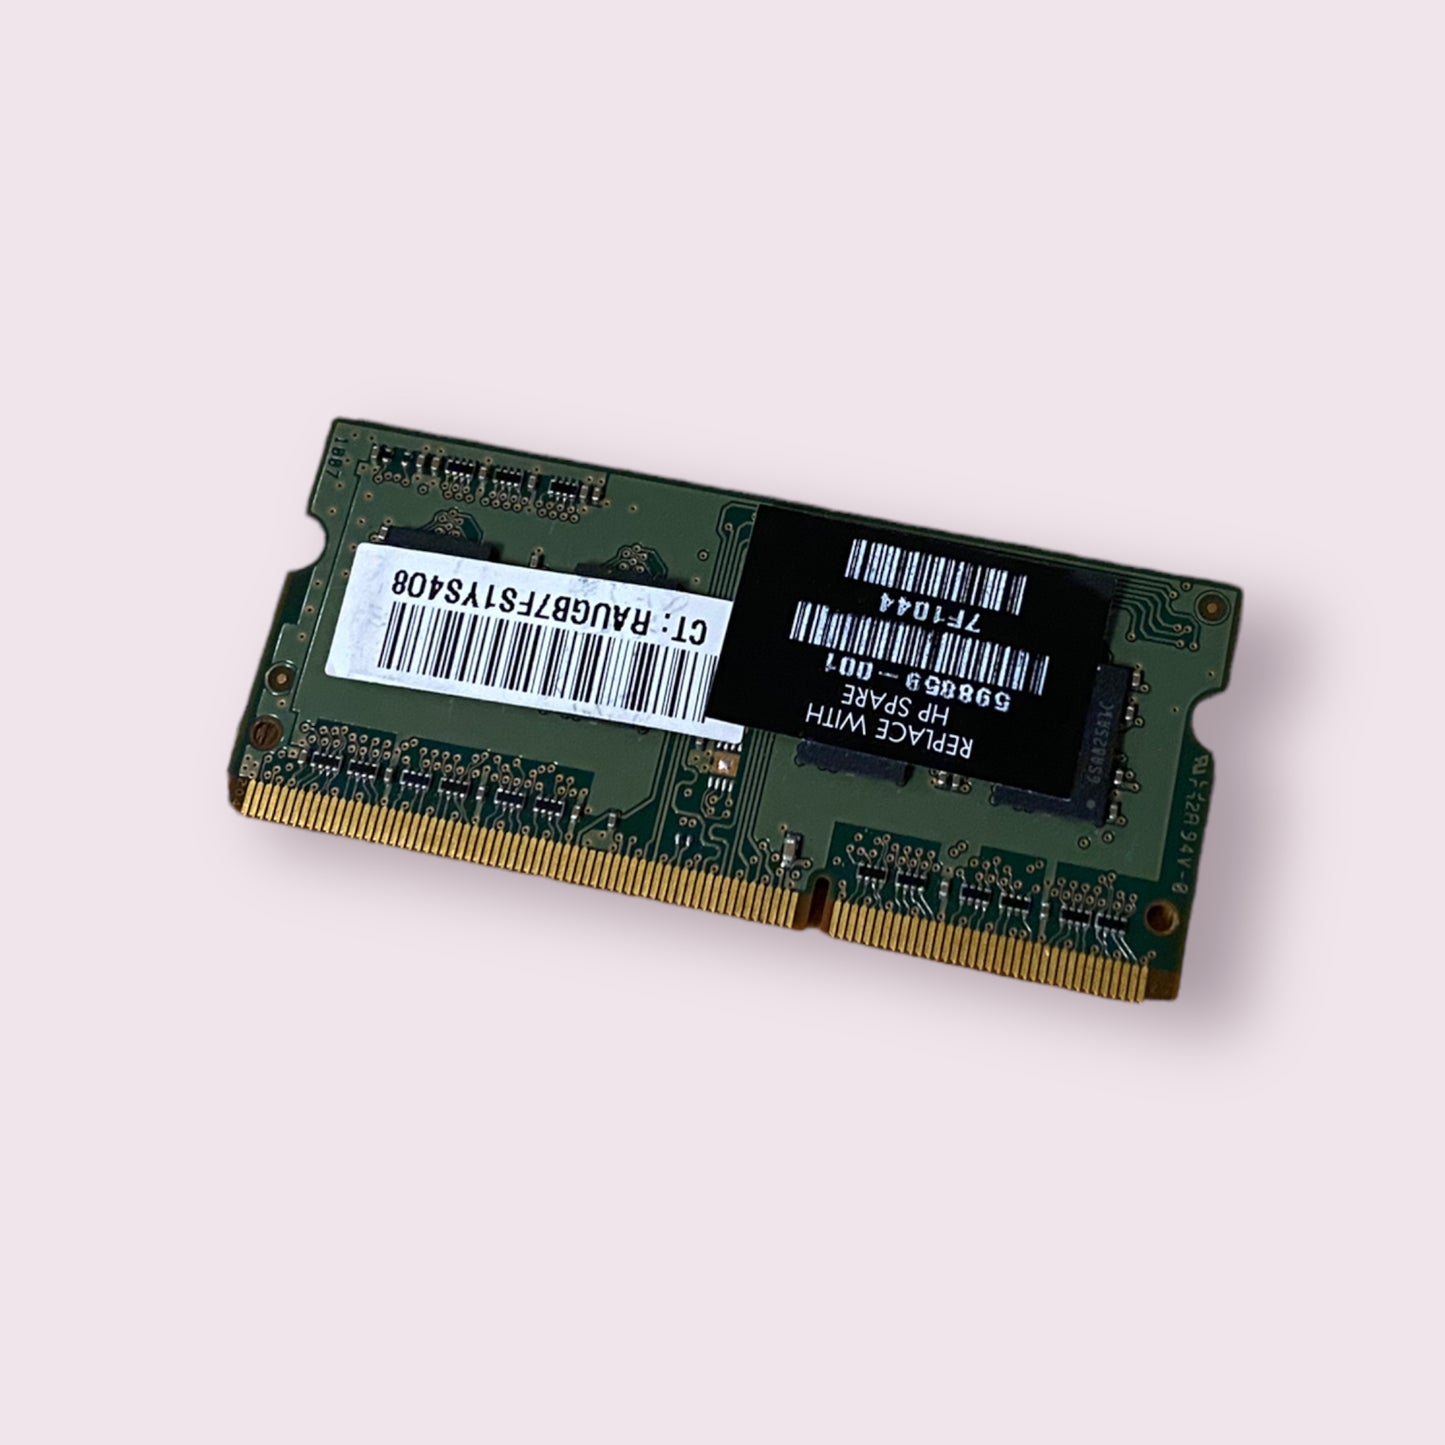 1GB DDR3 Laptop RAM PC3 10600S Mixed generic brands samsung crucial others - Used Part